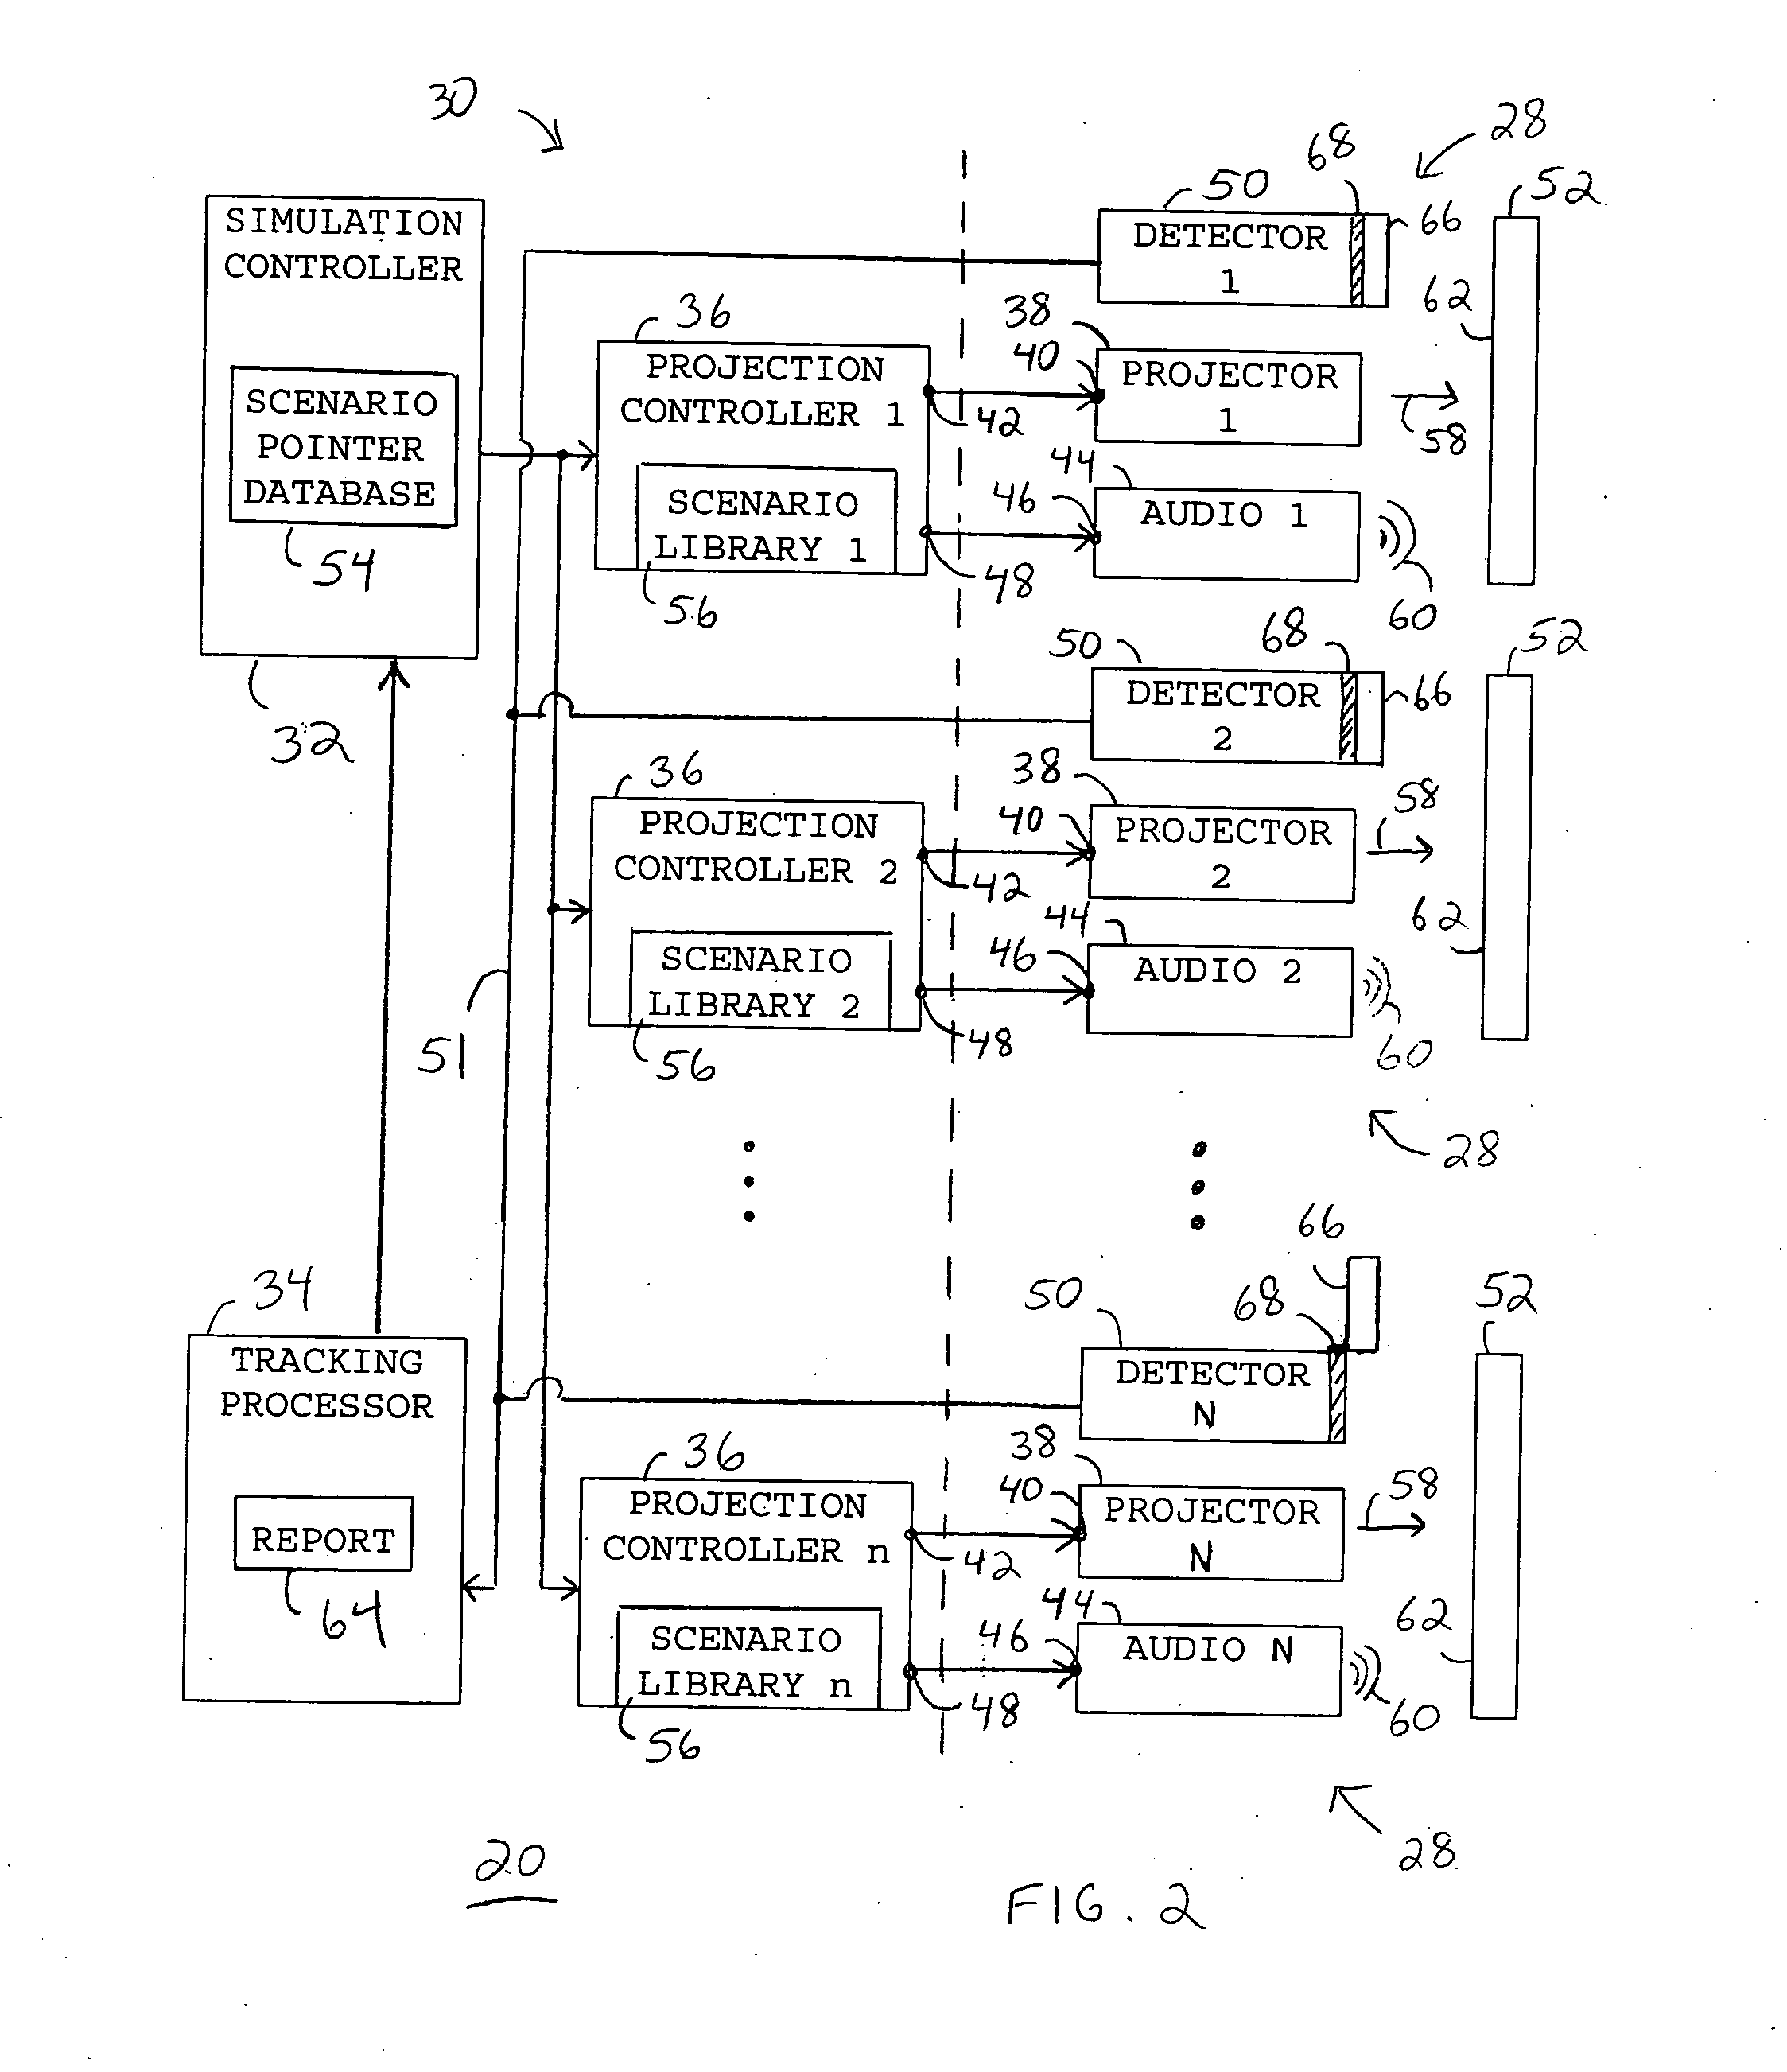 Method and program for scenario provision in a simulation system